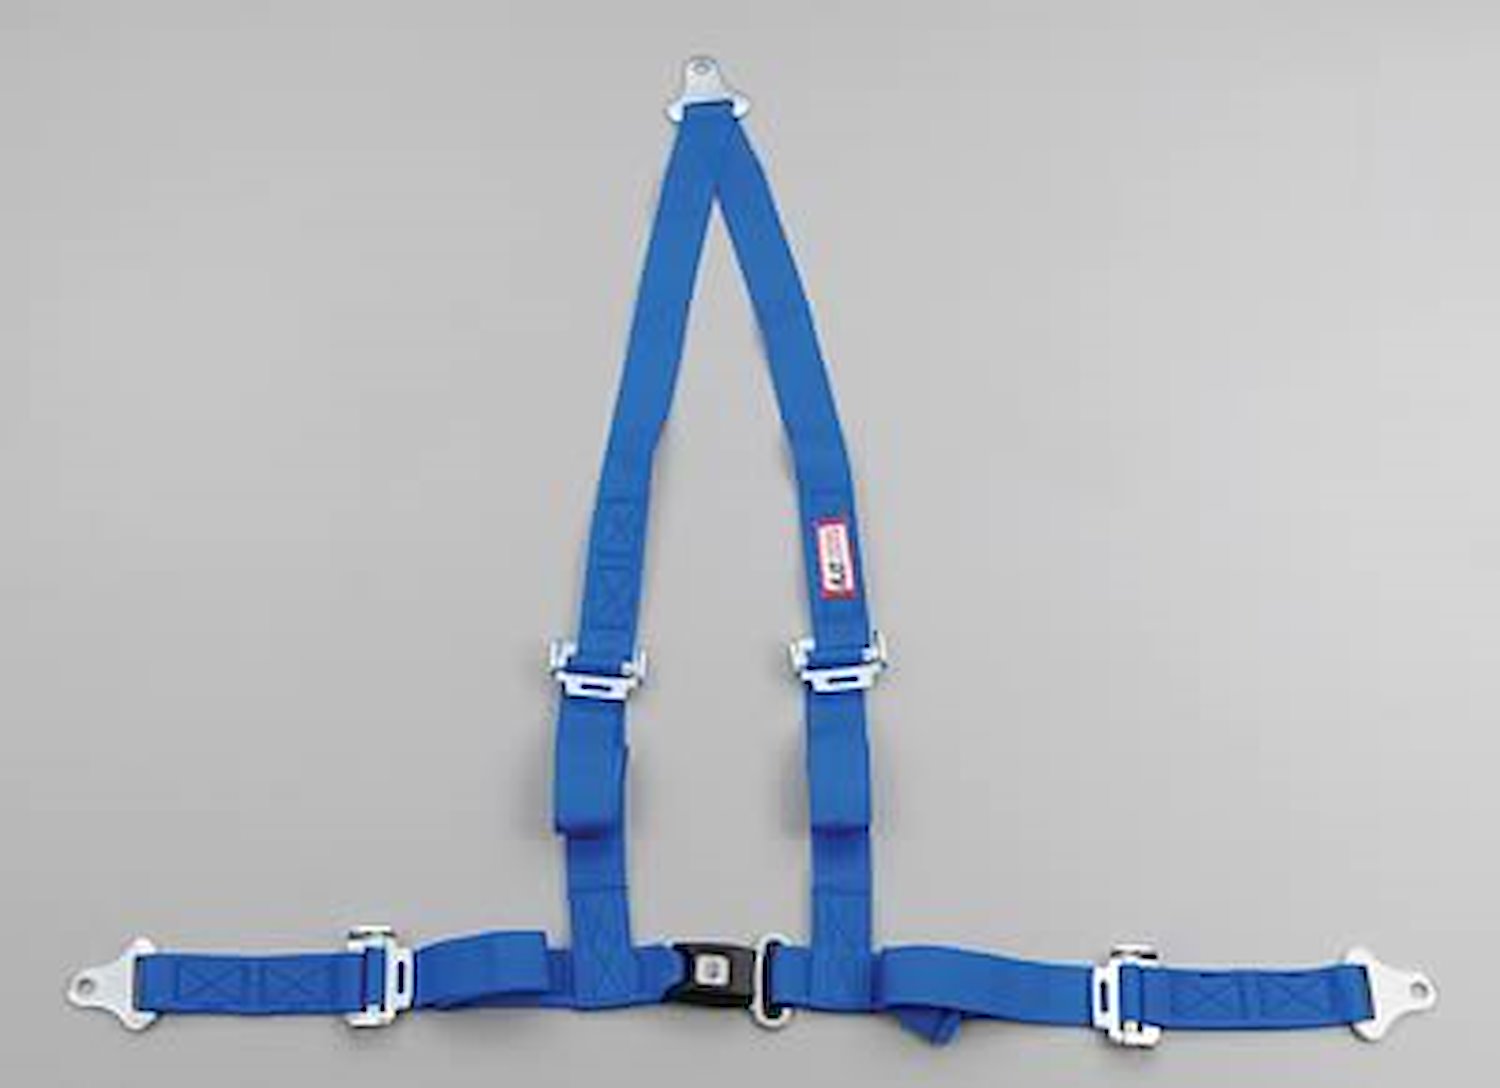 NON-SFI B&T HARNESS 2 PULL UP Lap Belt 2 S. H. Individual FLOOR Mount ALL WRAP ENDS w/STERNUM STRAP BLUE